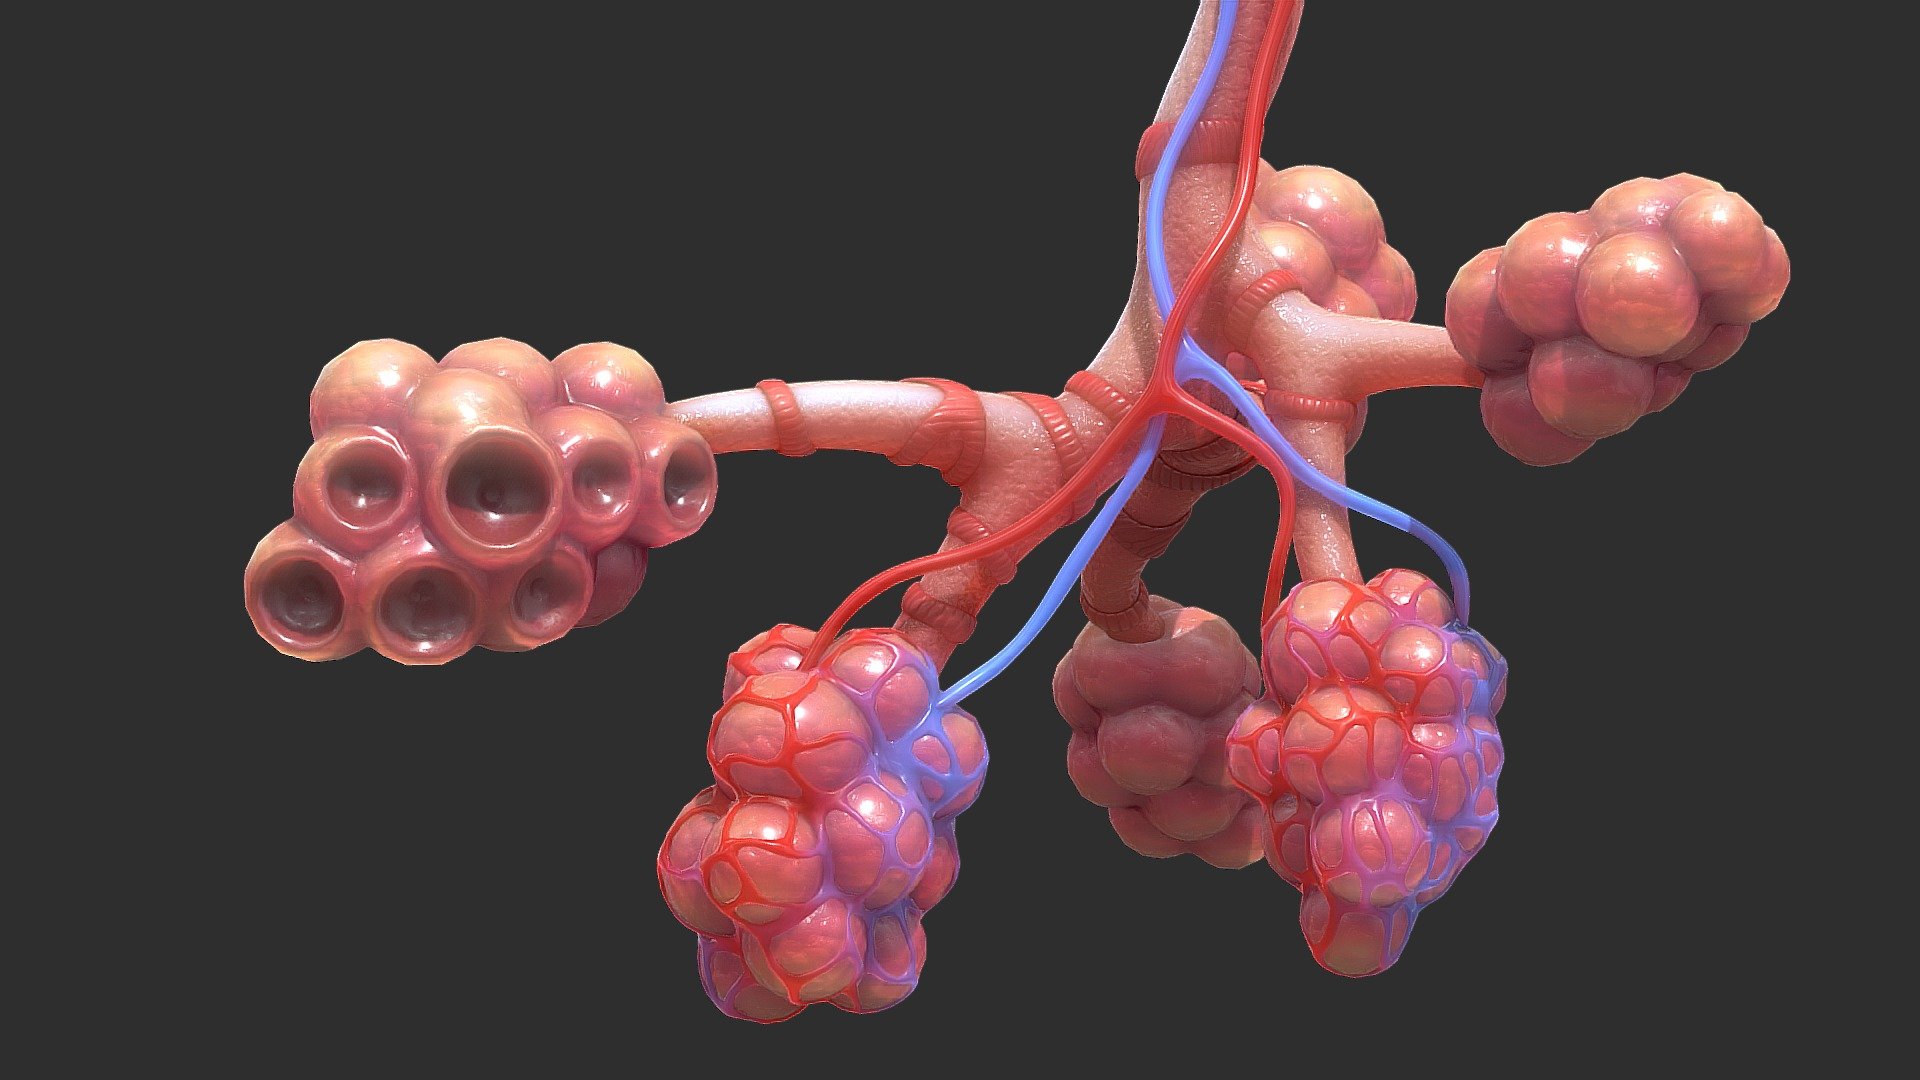 Originally modeled in Cinema 4D R 21 + Zbrush 2020



Maps for Realistic Human Bronchi Alveoli Anatomy




BaseColor

Metallic

Roughness

Normal

Ambient Occlusion



SCALE:
- Model at world center and real scale:
       Metric in centimeter
       1 unit = 1 centimeter



Texture resolution 4096x4096
Texture format PNG



Poly Count :
Polygon Count - 68850
Vertex Count - 34035
No N-Gons - Bronchi Alveoli - Buy Royalty Free 3D model by zames1992 3d model